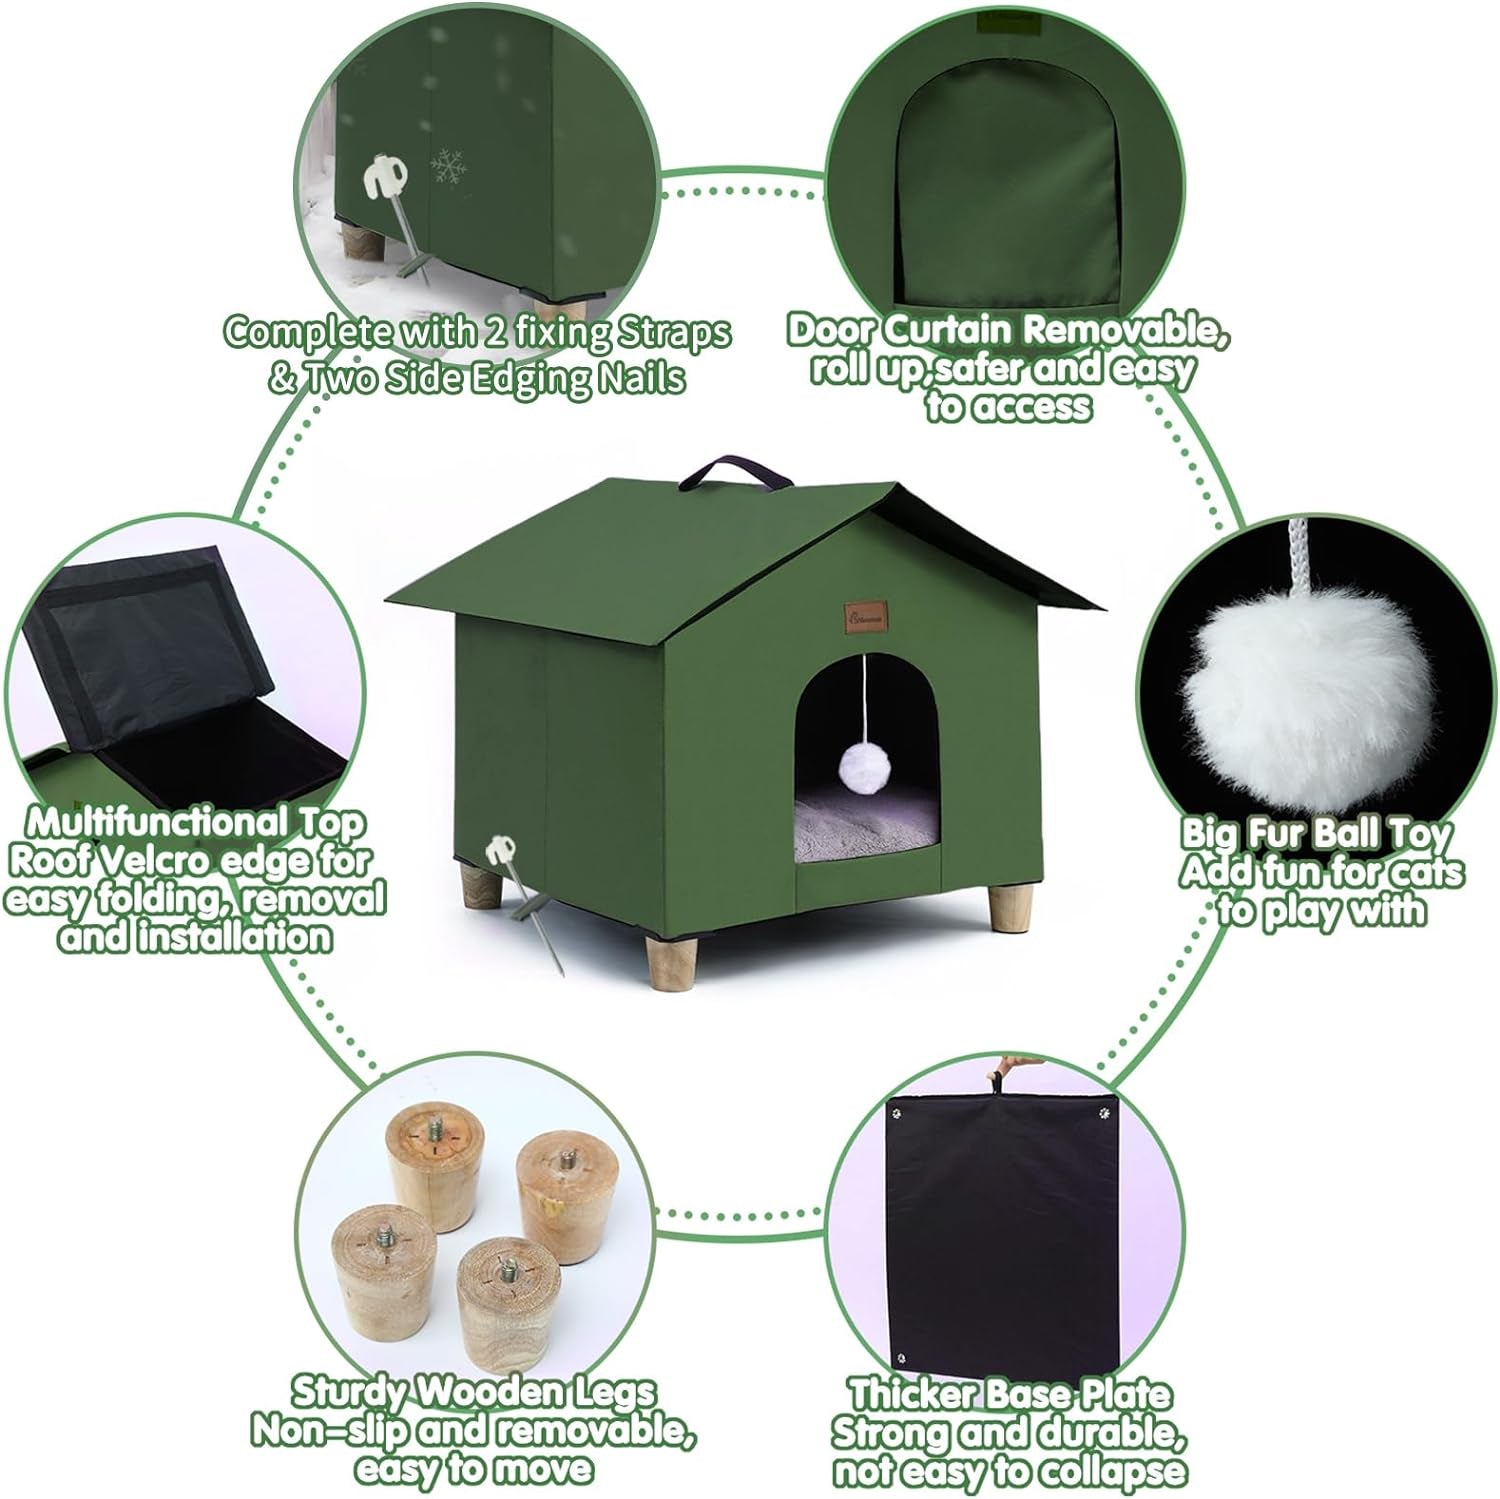 Outdoor Cat House for Winter, Weatherproof Feral Cat Shelter with Removable Soft Mat, Collapsible Cat Houses for Outdoor/Indoor Cats, Kitty Cat Condos 18 X17X18Inch (Upgraded-Army Green)